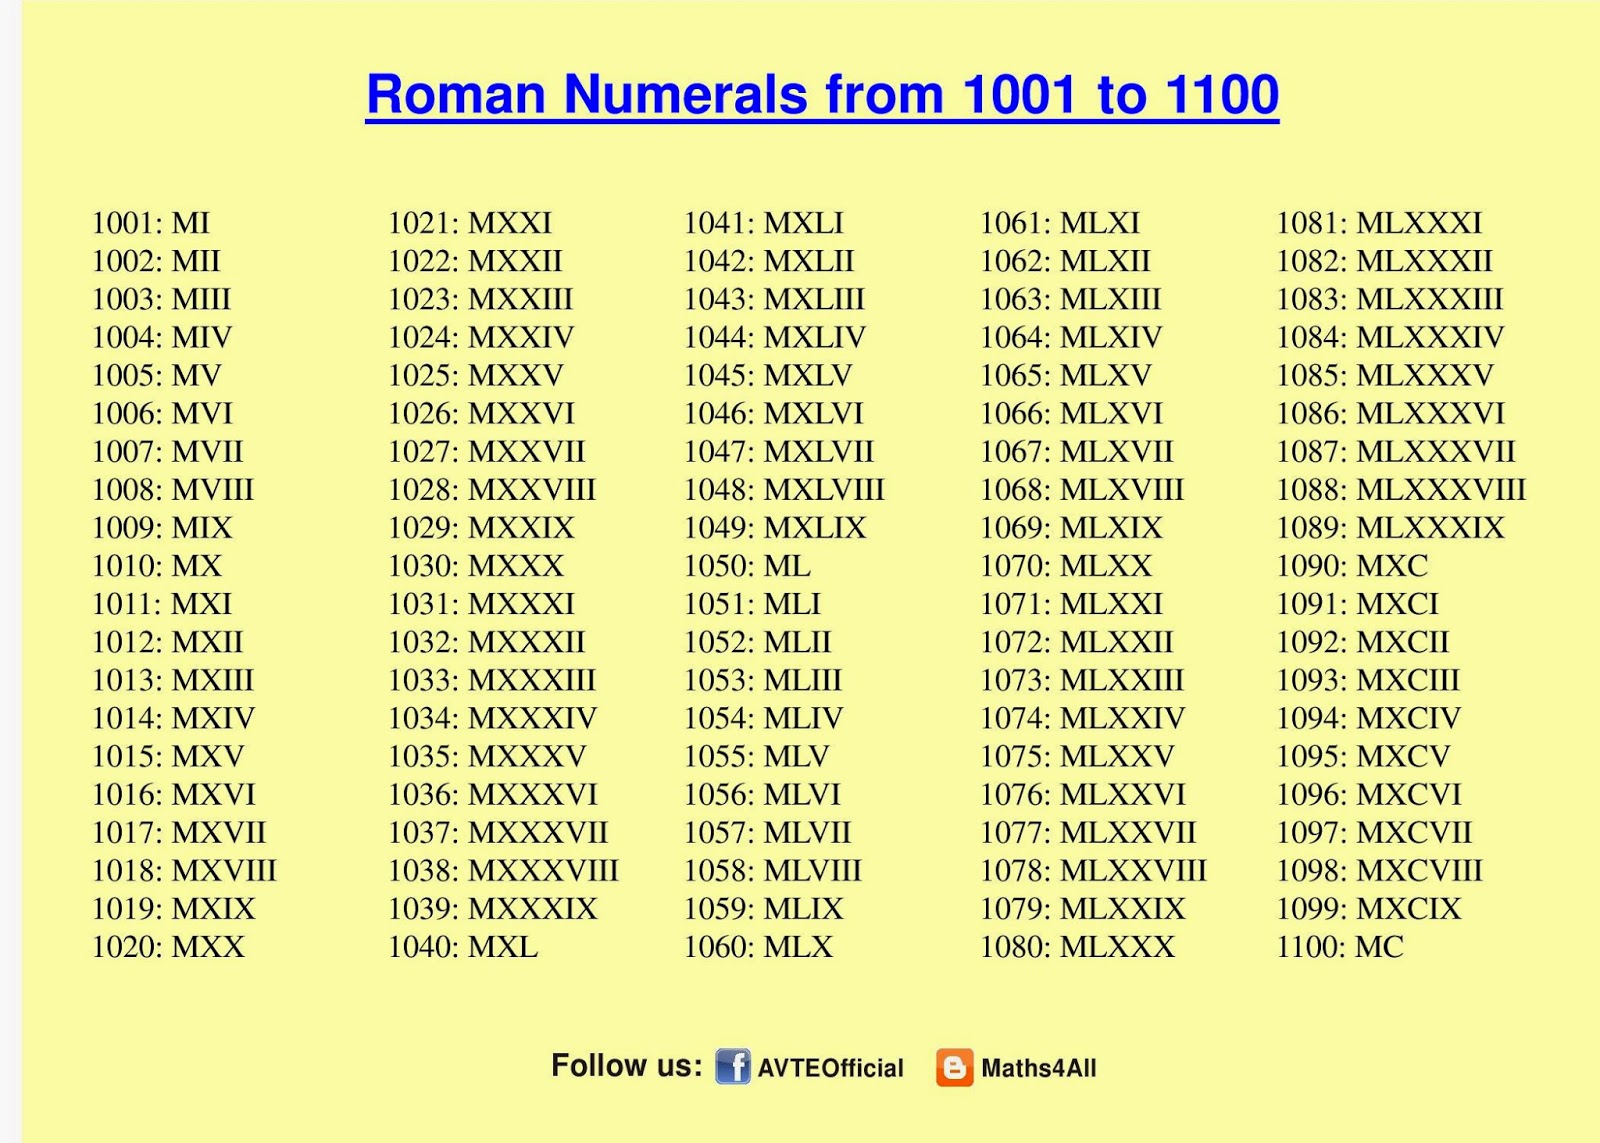 Maths4all: ROMAN NUMERALS 1001 TO 1100